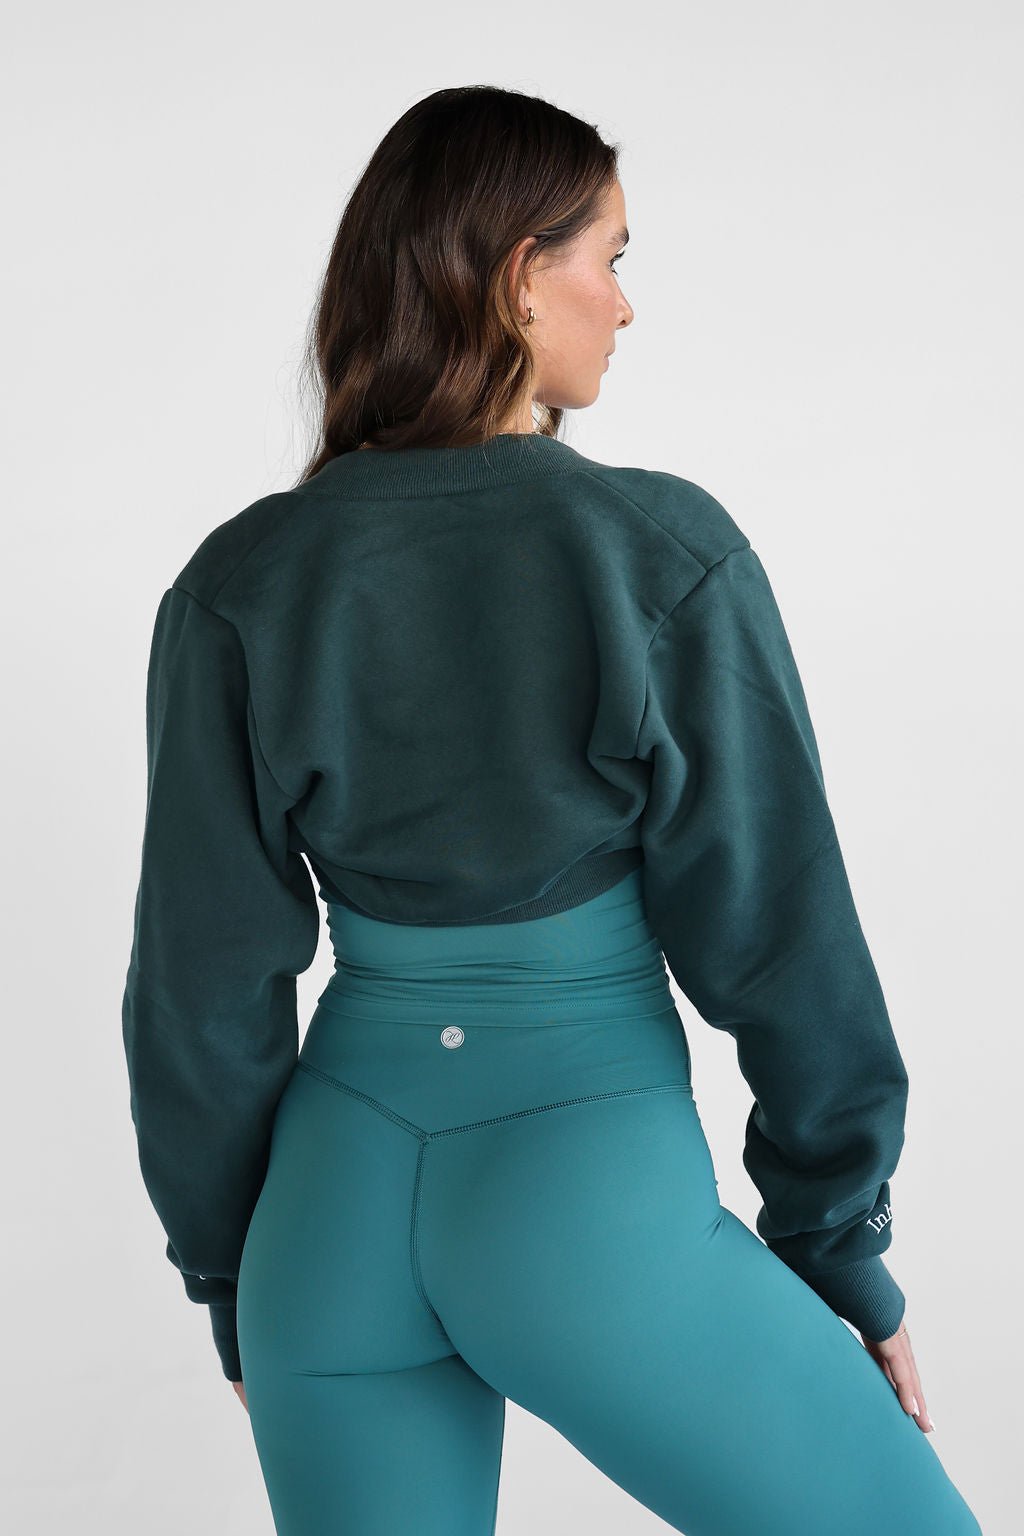 Sweater Shrug/Bolero - Forrest (SHIPPNG AFTER 10/07) - LEELO ACTIVE